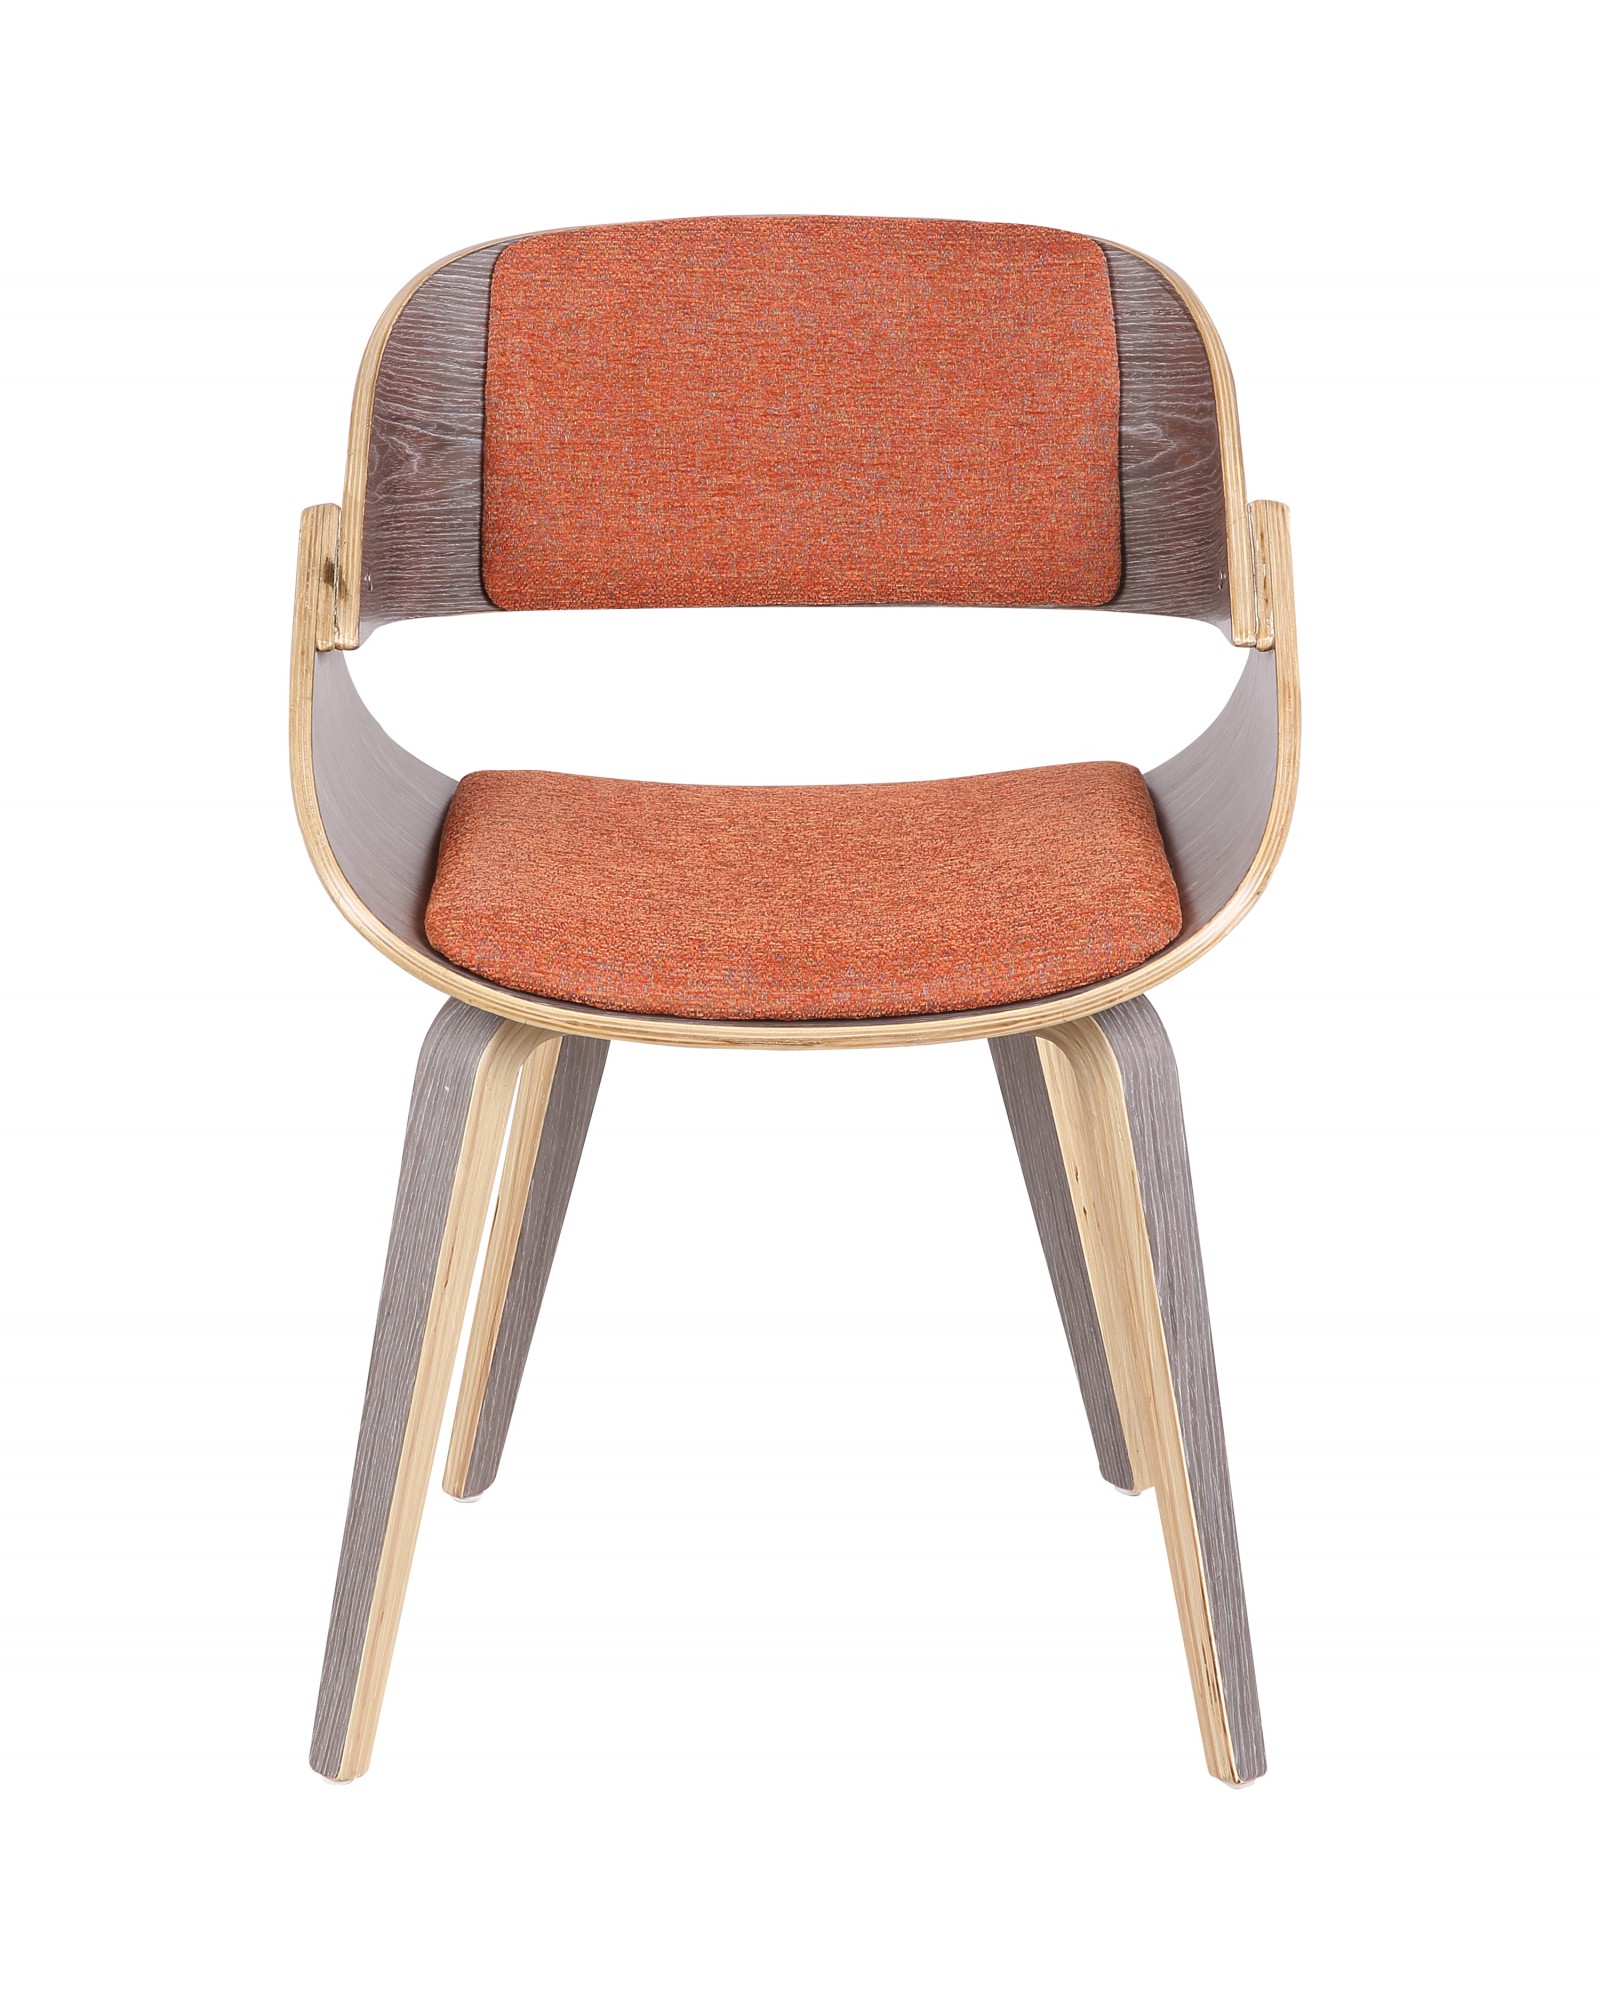 Fortunato Mid-Century Modern Dining/Accent Chair in Light Grey Wood with Orange Fabric